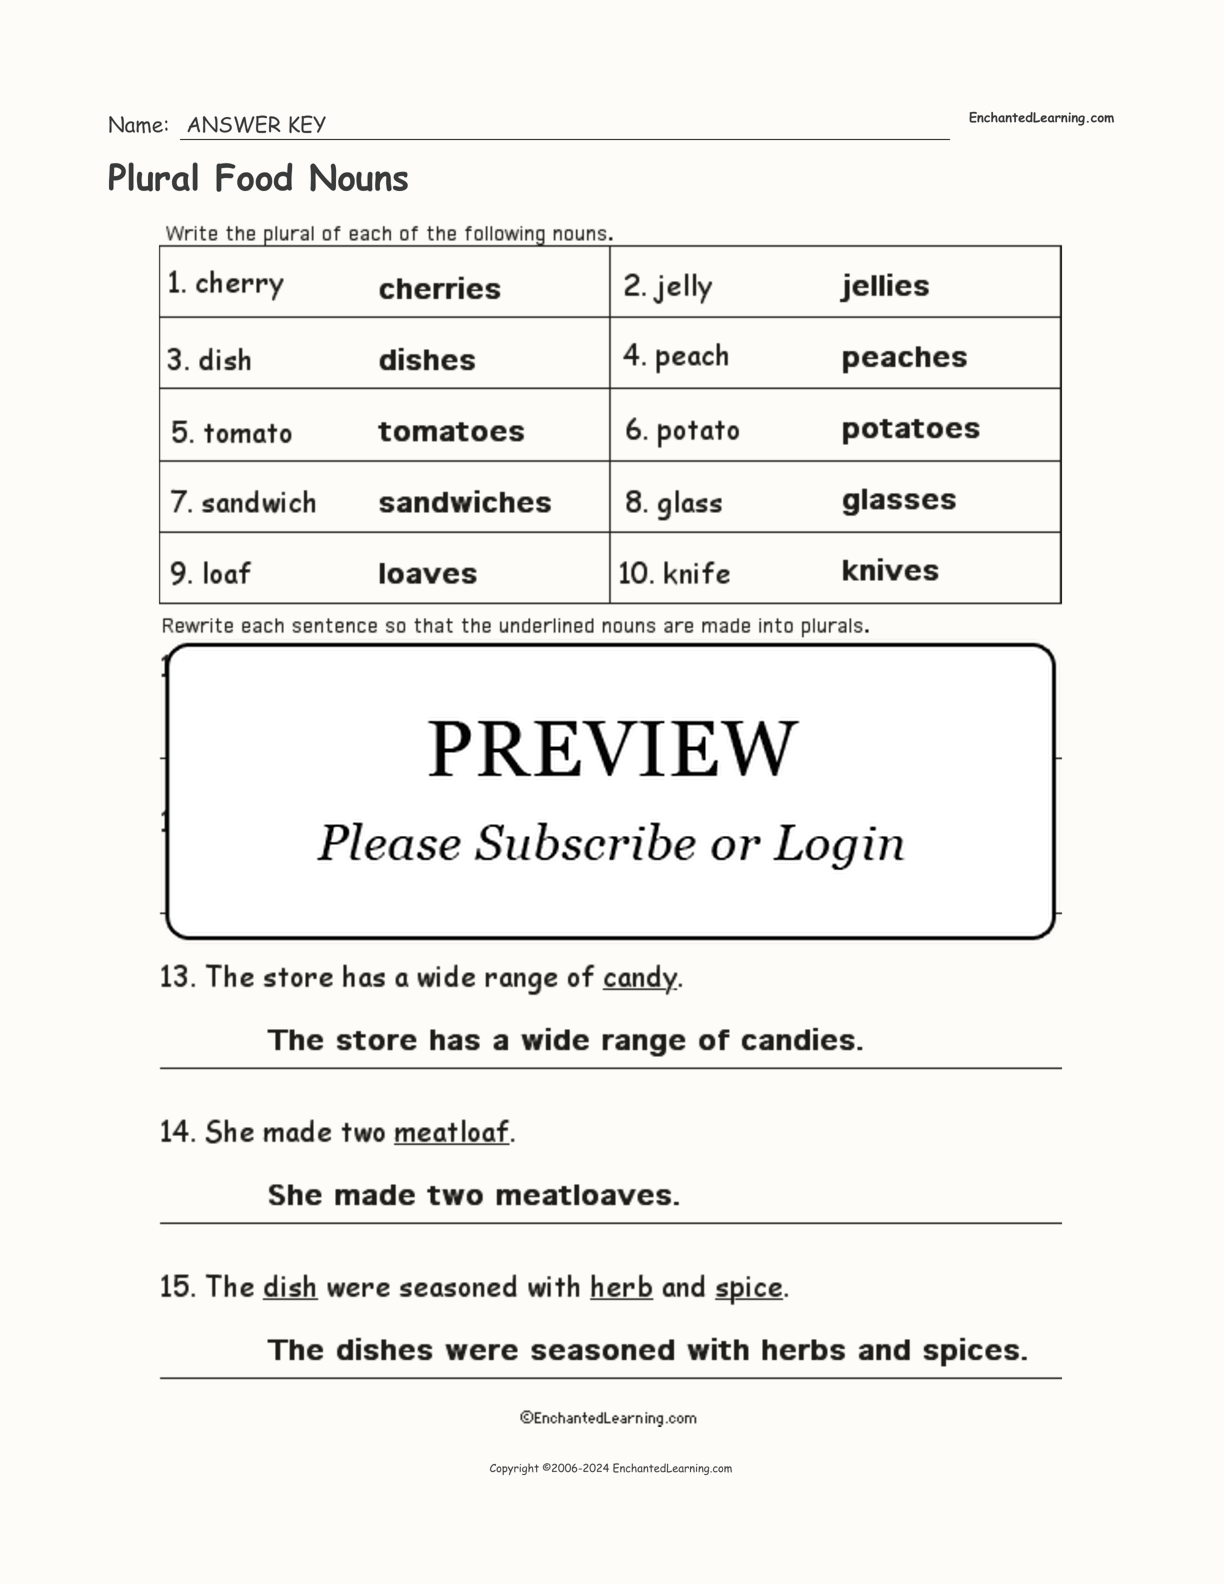 Plural Food Nouns interactive worksheet page 2